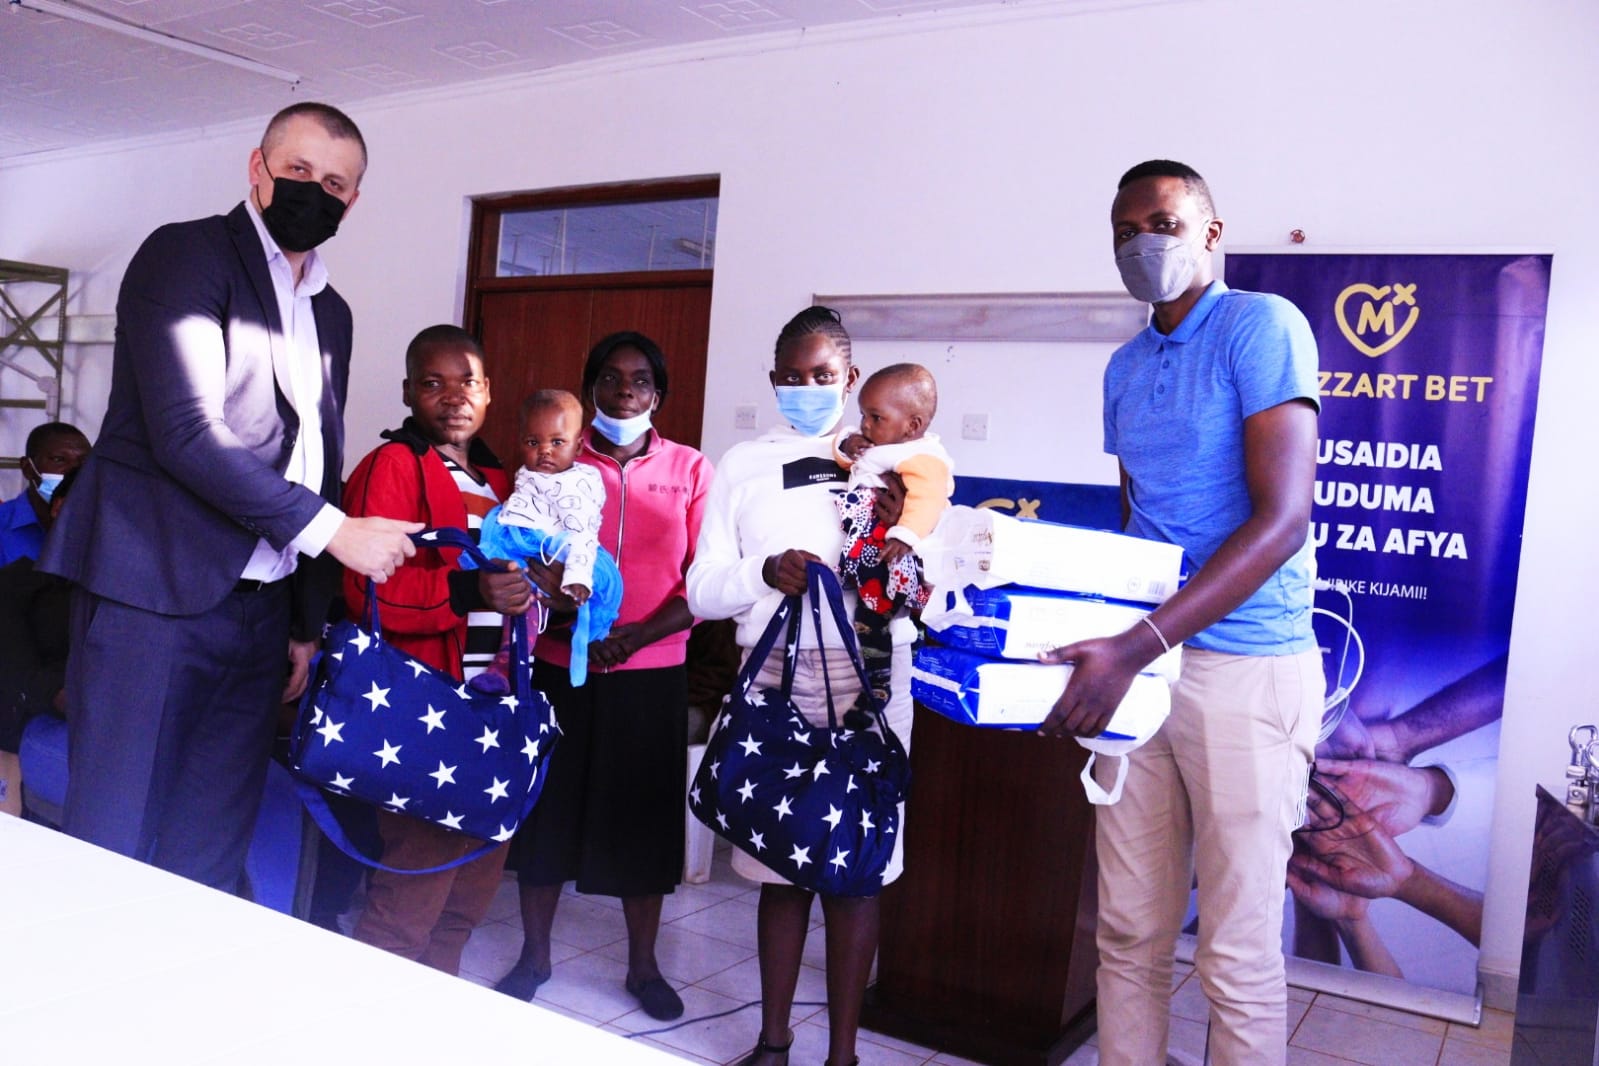 Relief as pre-term twins get a new lease of life thanks to a Mozzart donation in Waithaka, Kikuyu